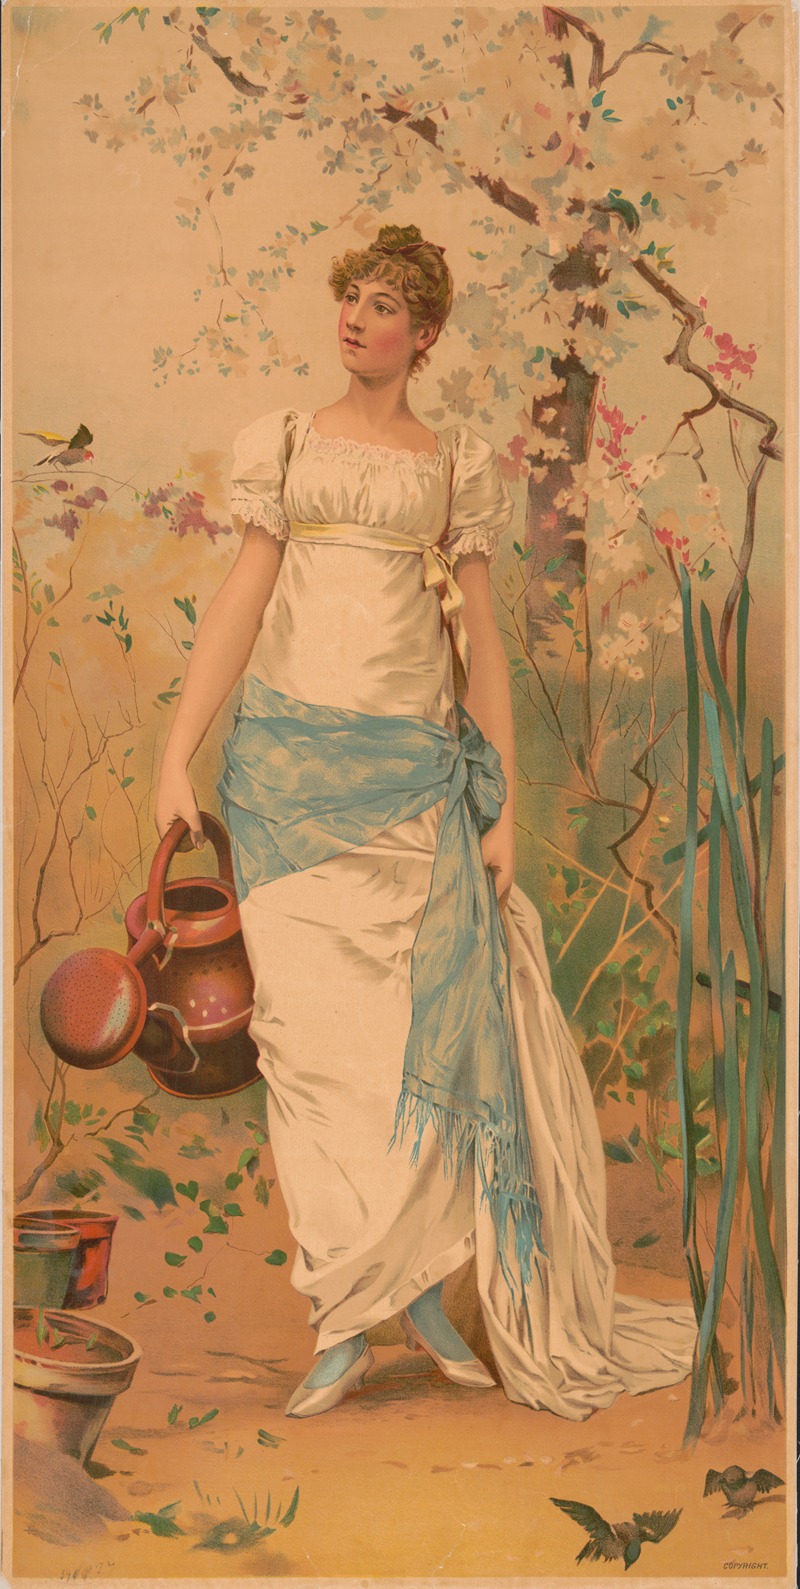 Anonymous - Woman in white dress with blue sash standing holding a watering can